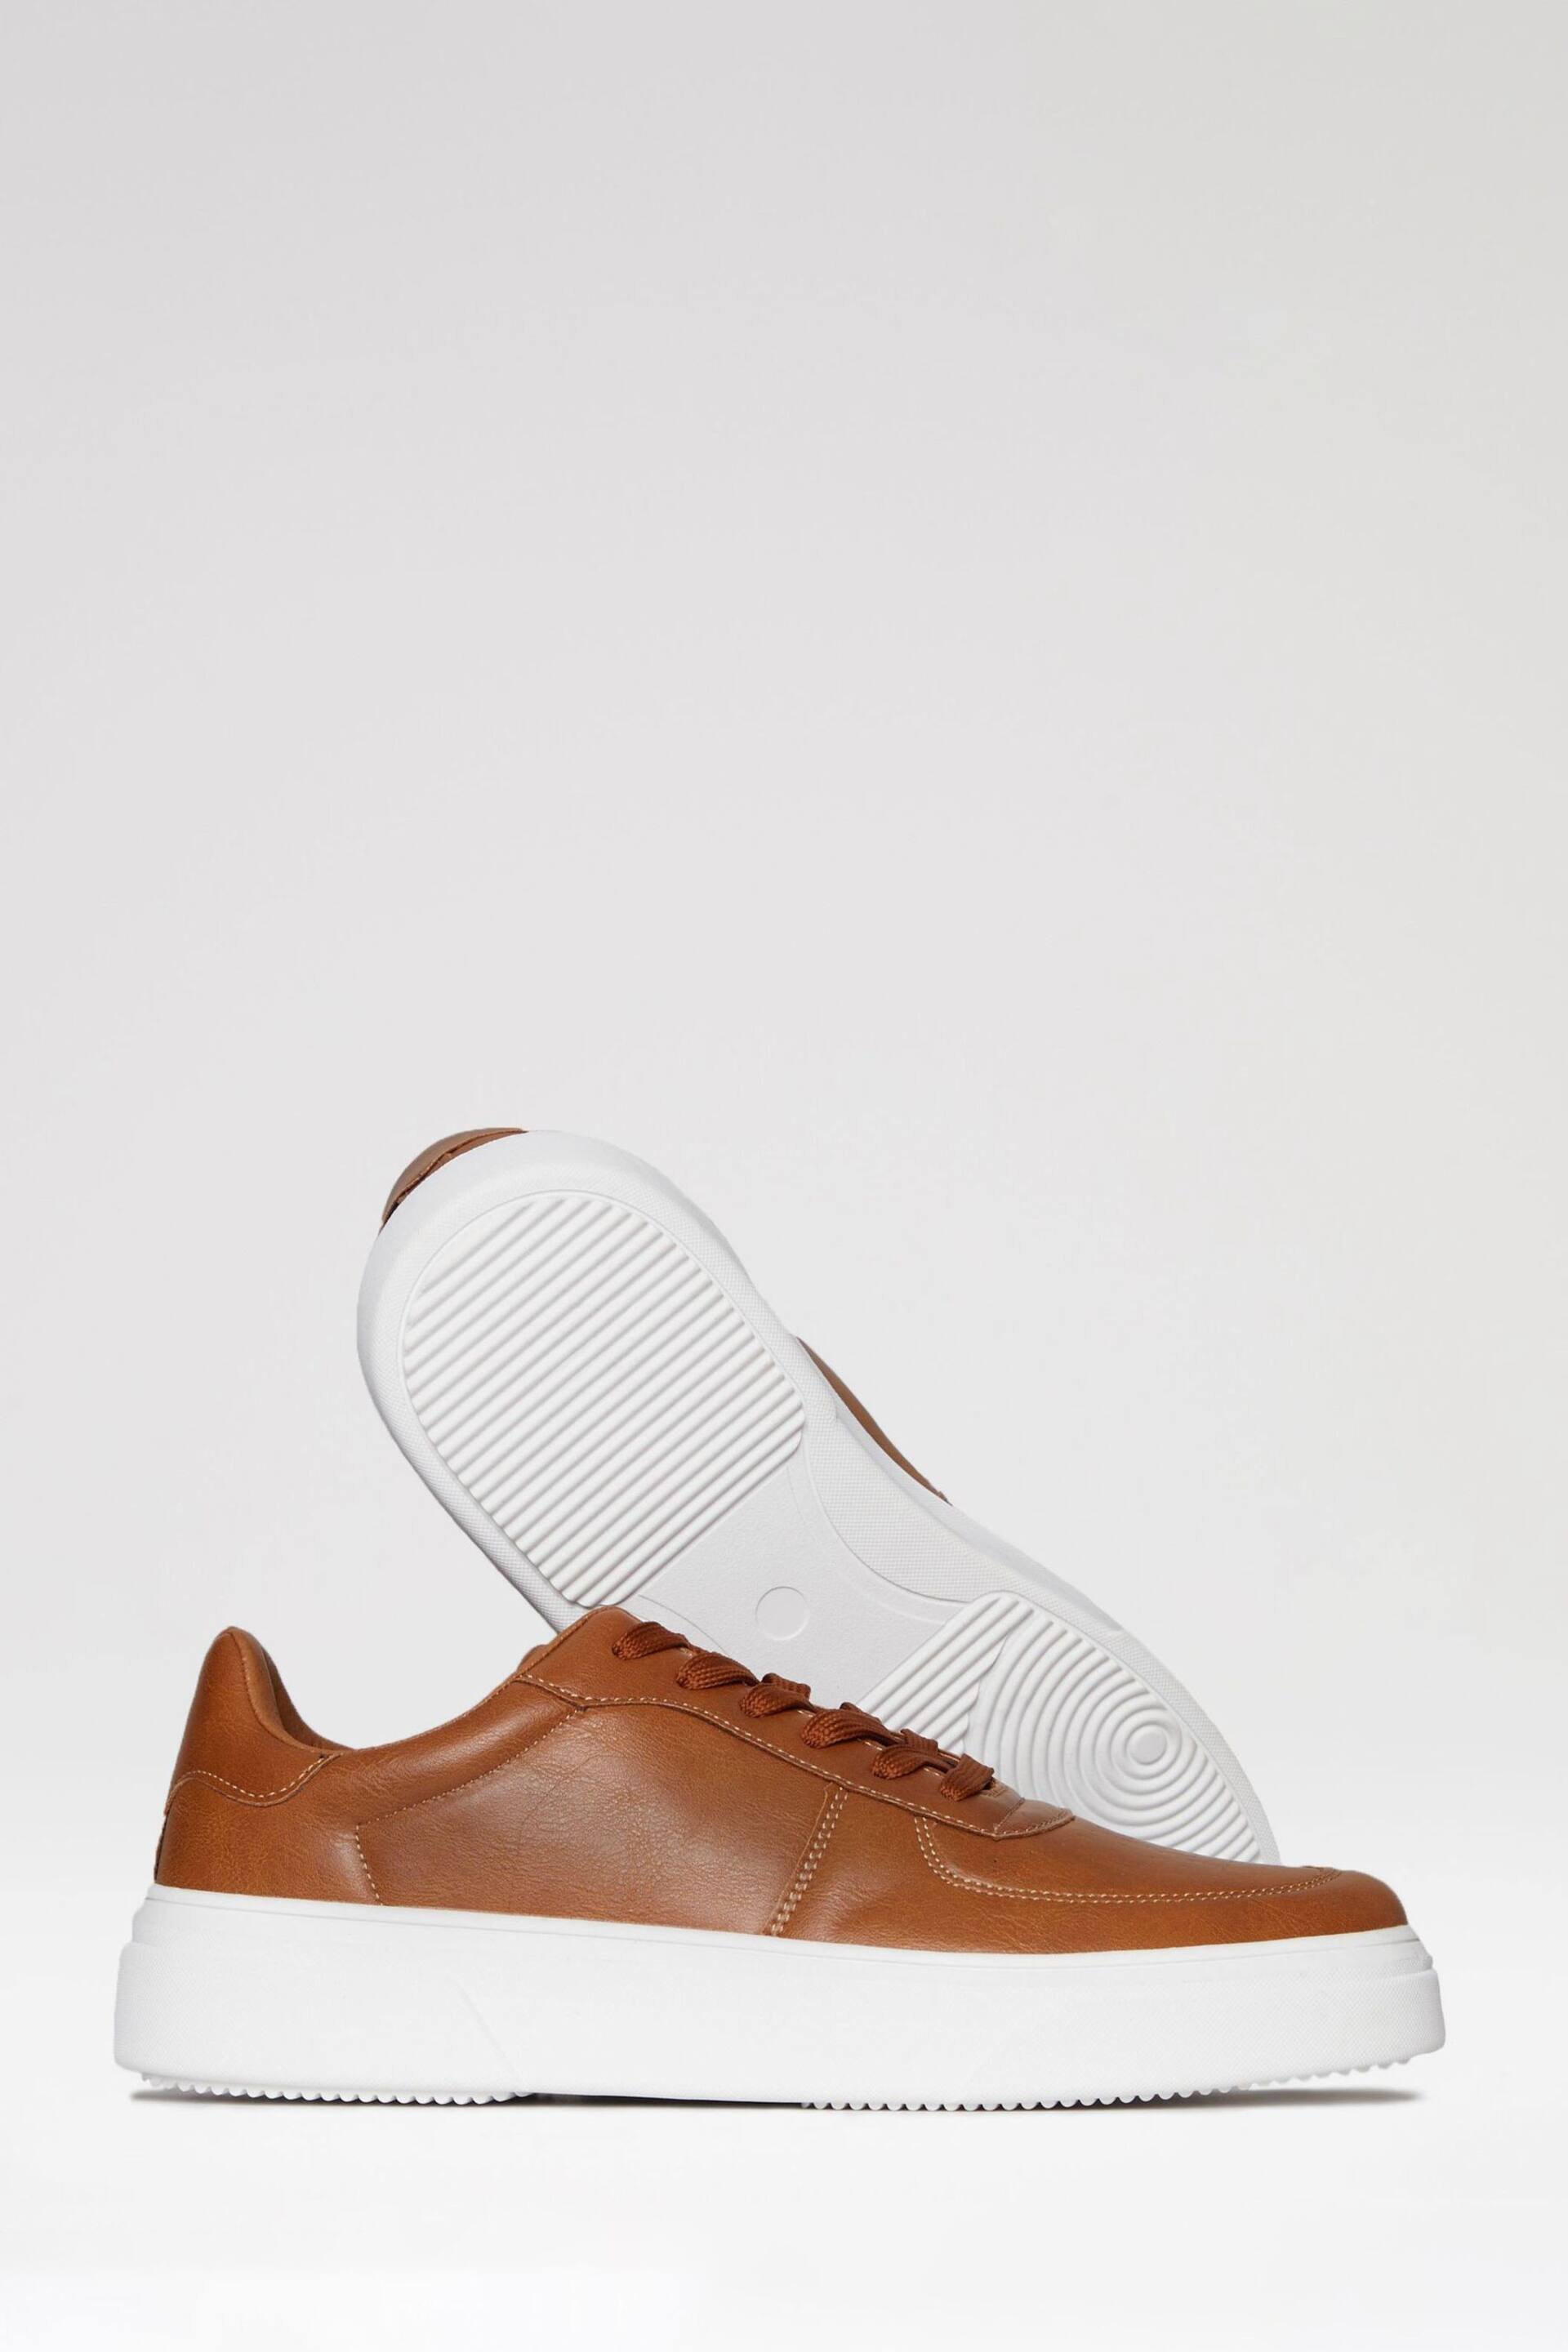 Threadbare Brown Casual Raised Sole Trainers - Image 3 of 4